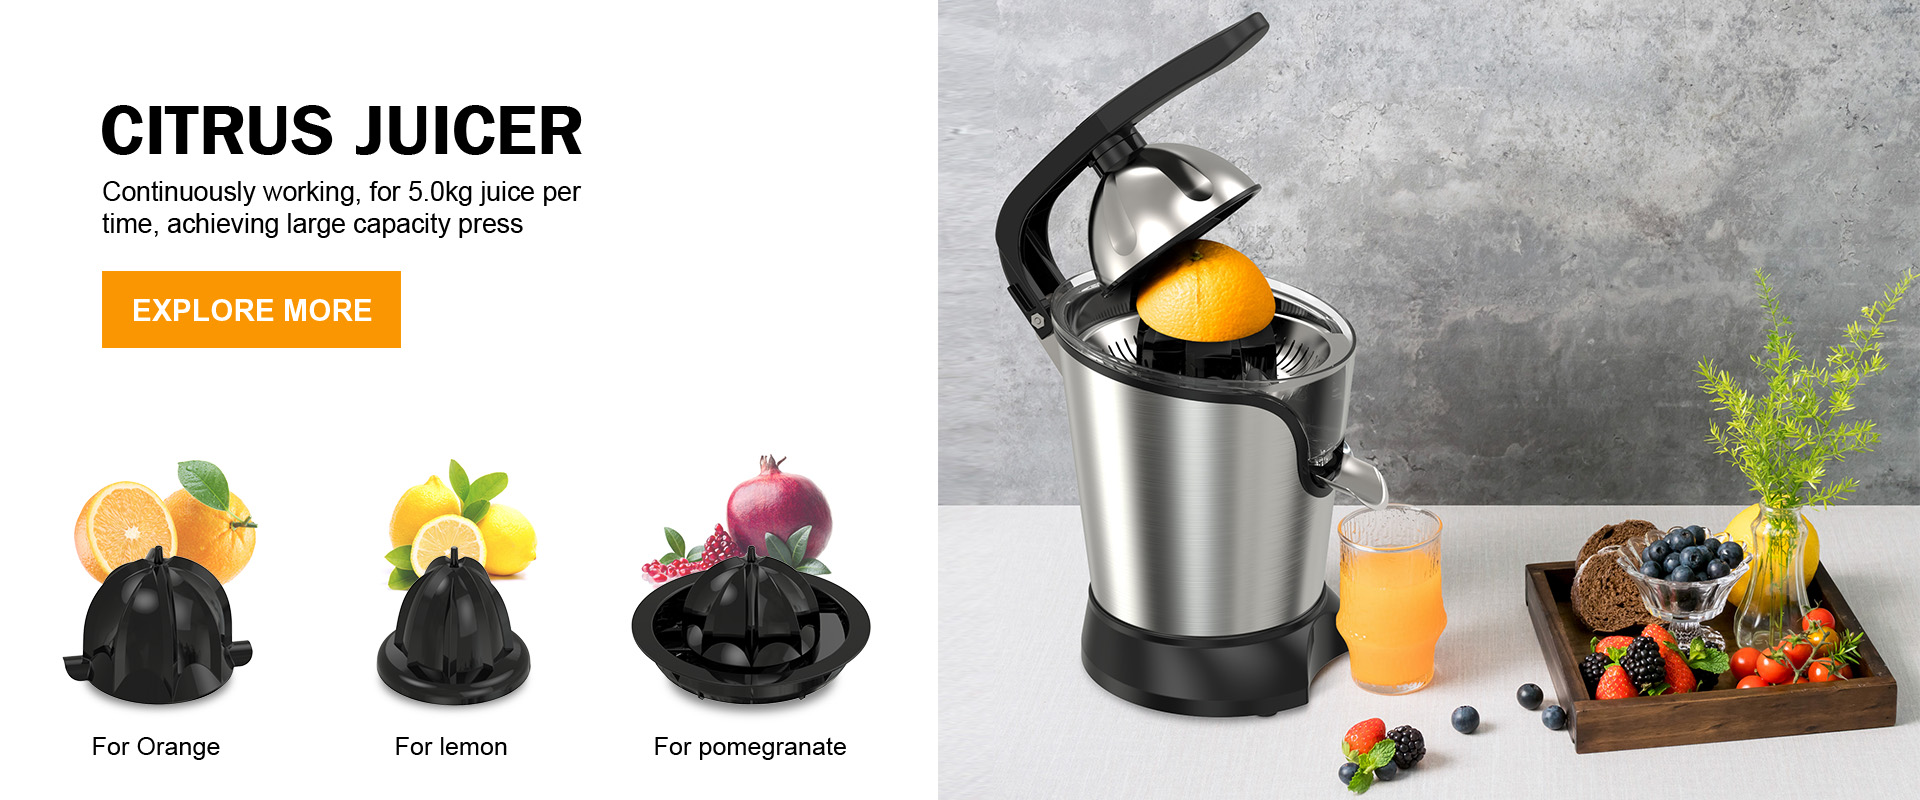 Exploring Centrifugal Juicers, Portable Juice Blenders, And Electric Citrus Juicers